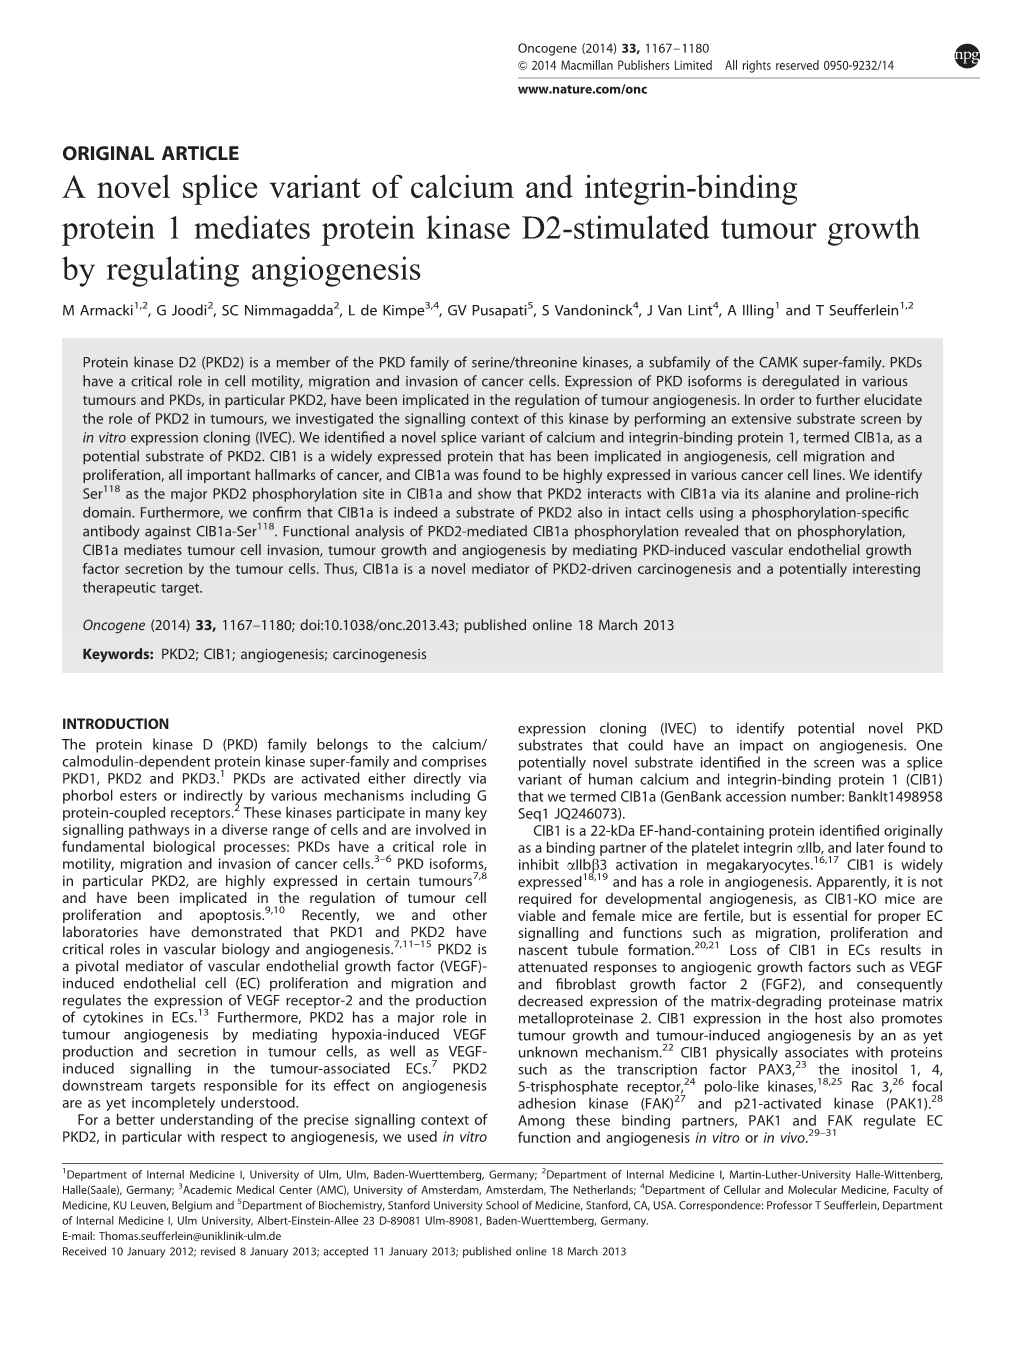 A Novel Splice Variant of Calcium and Integrin-Binding Protein 1 Mediates Protein Kinase D2-Stimulated Tumour Growth by Regulating Angiogenesis